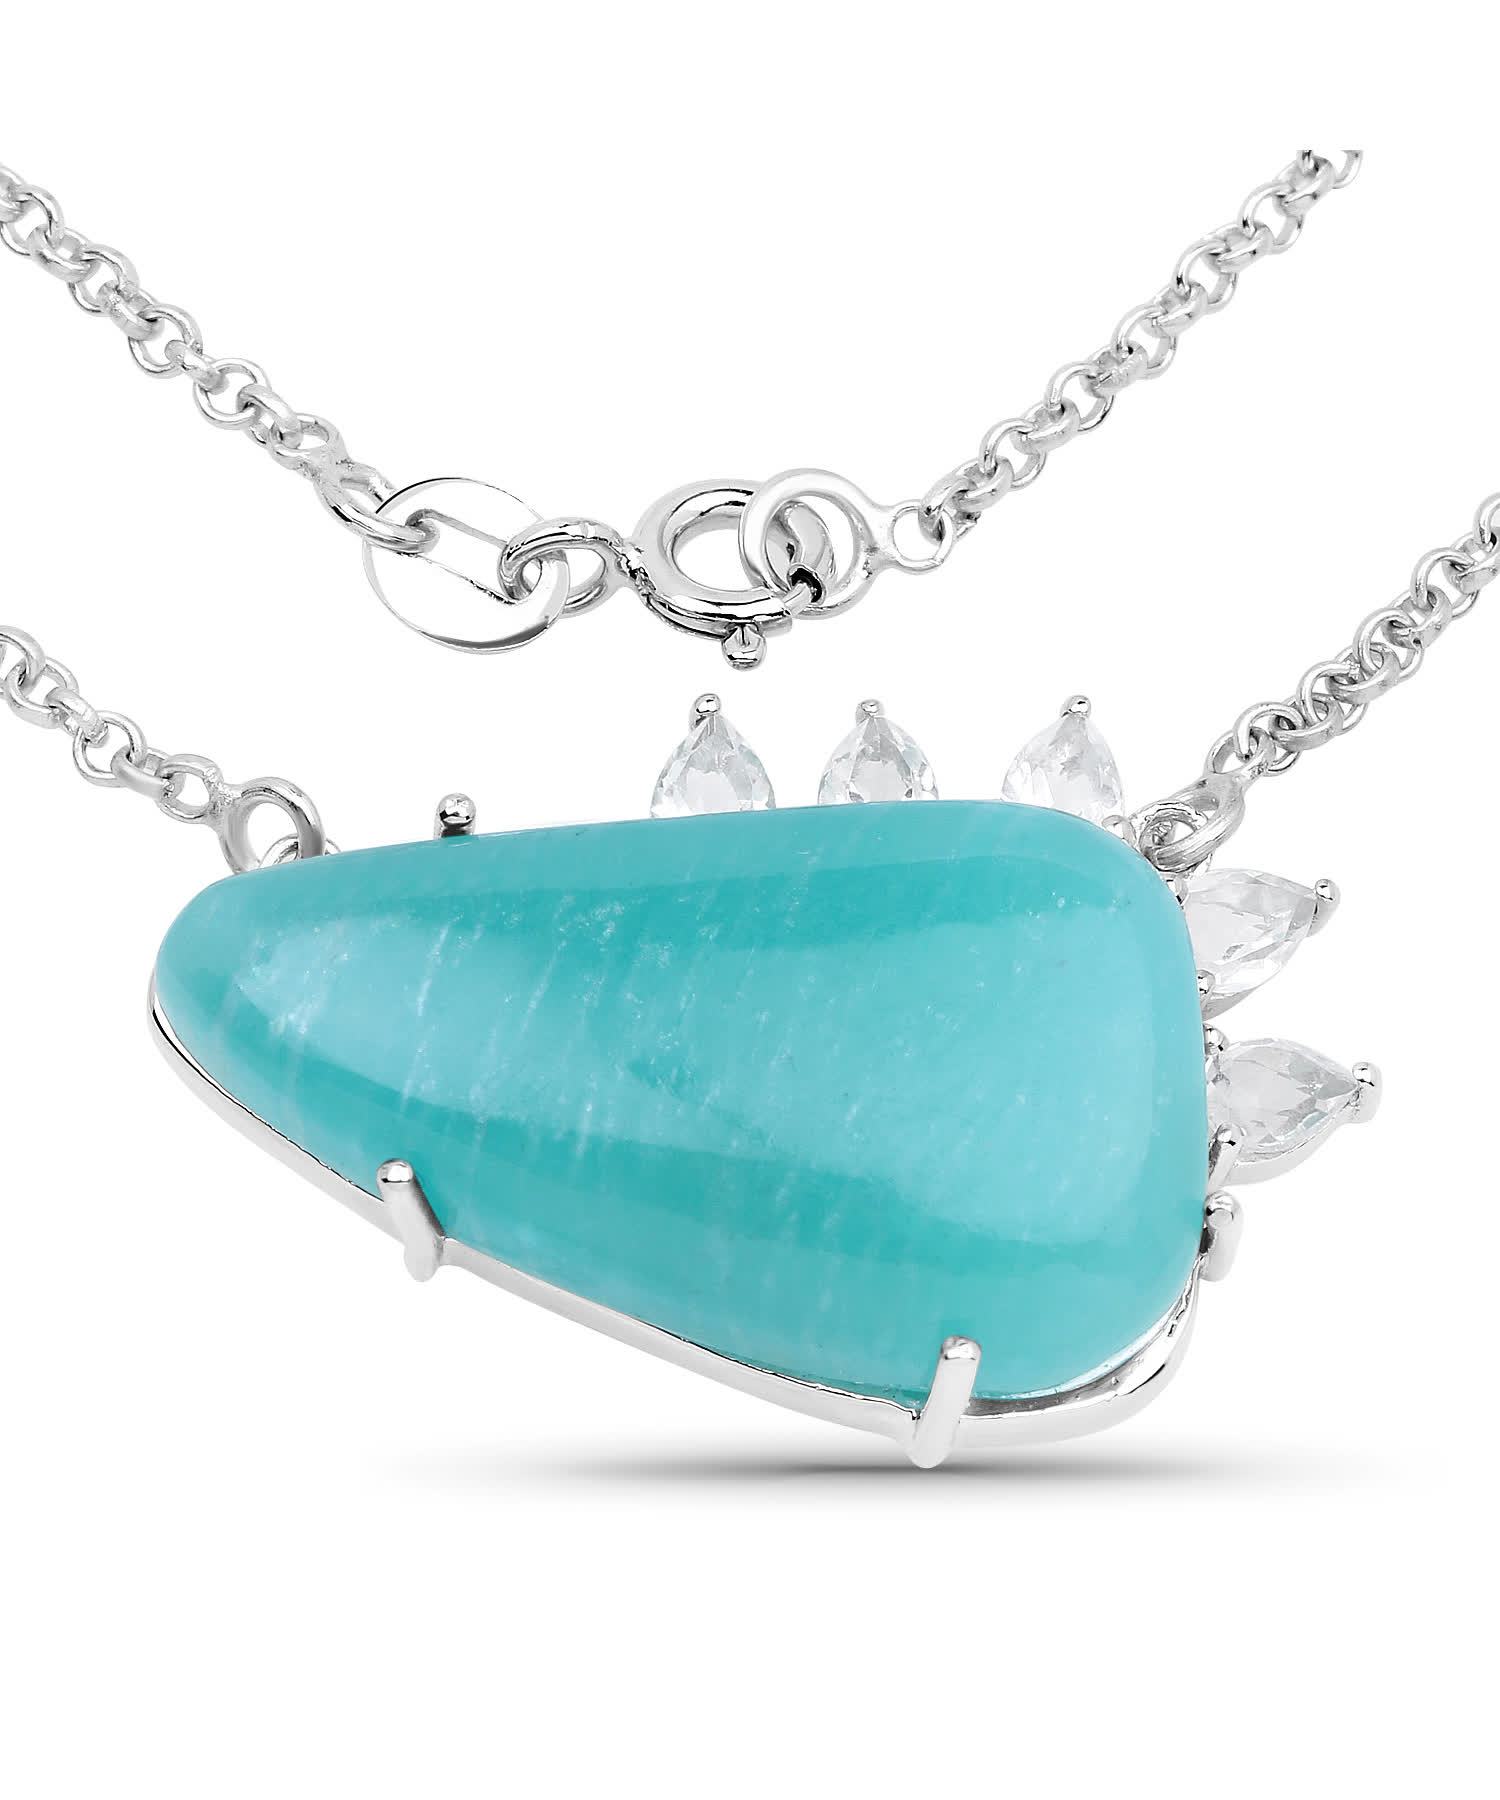 13.41ctw Natural Amazonite and Topaz Rhodium Plated 925 Sterling Silver Necklace View 1